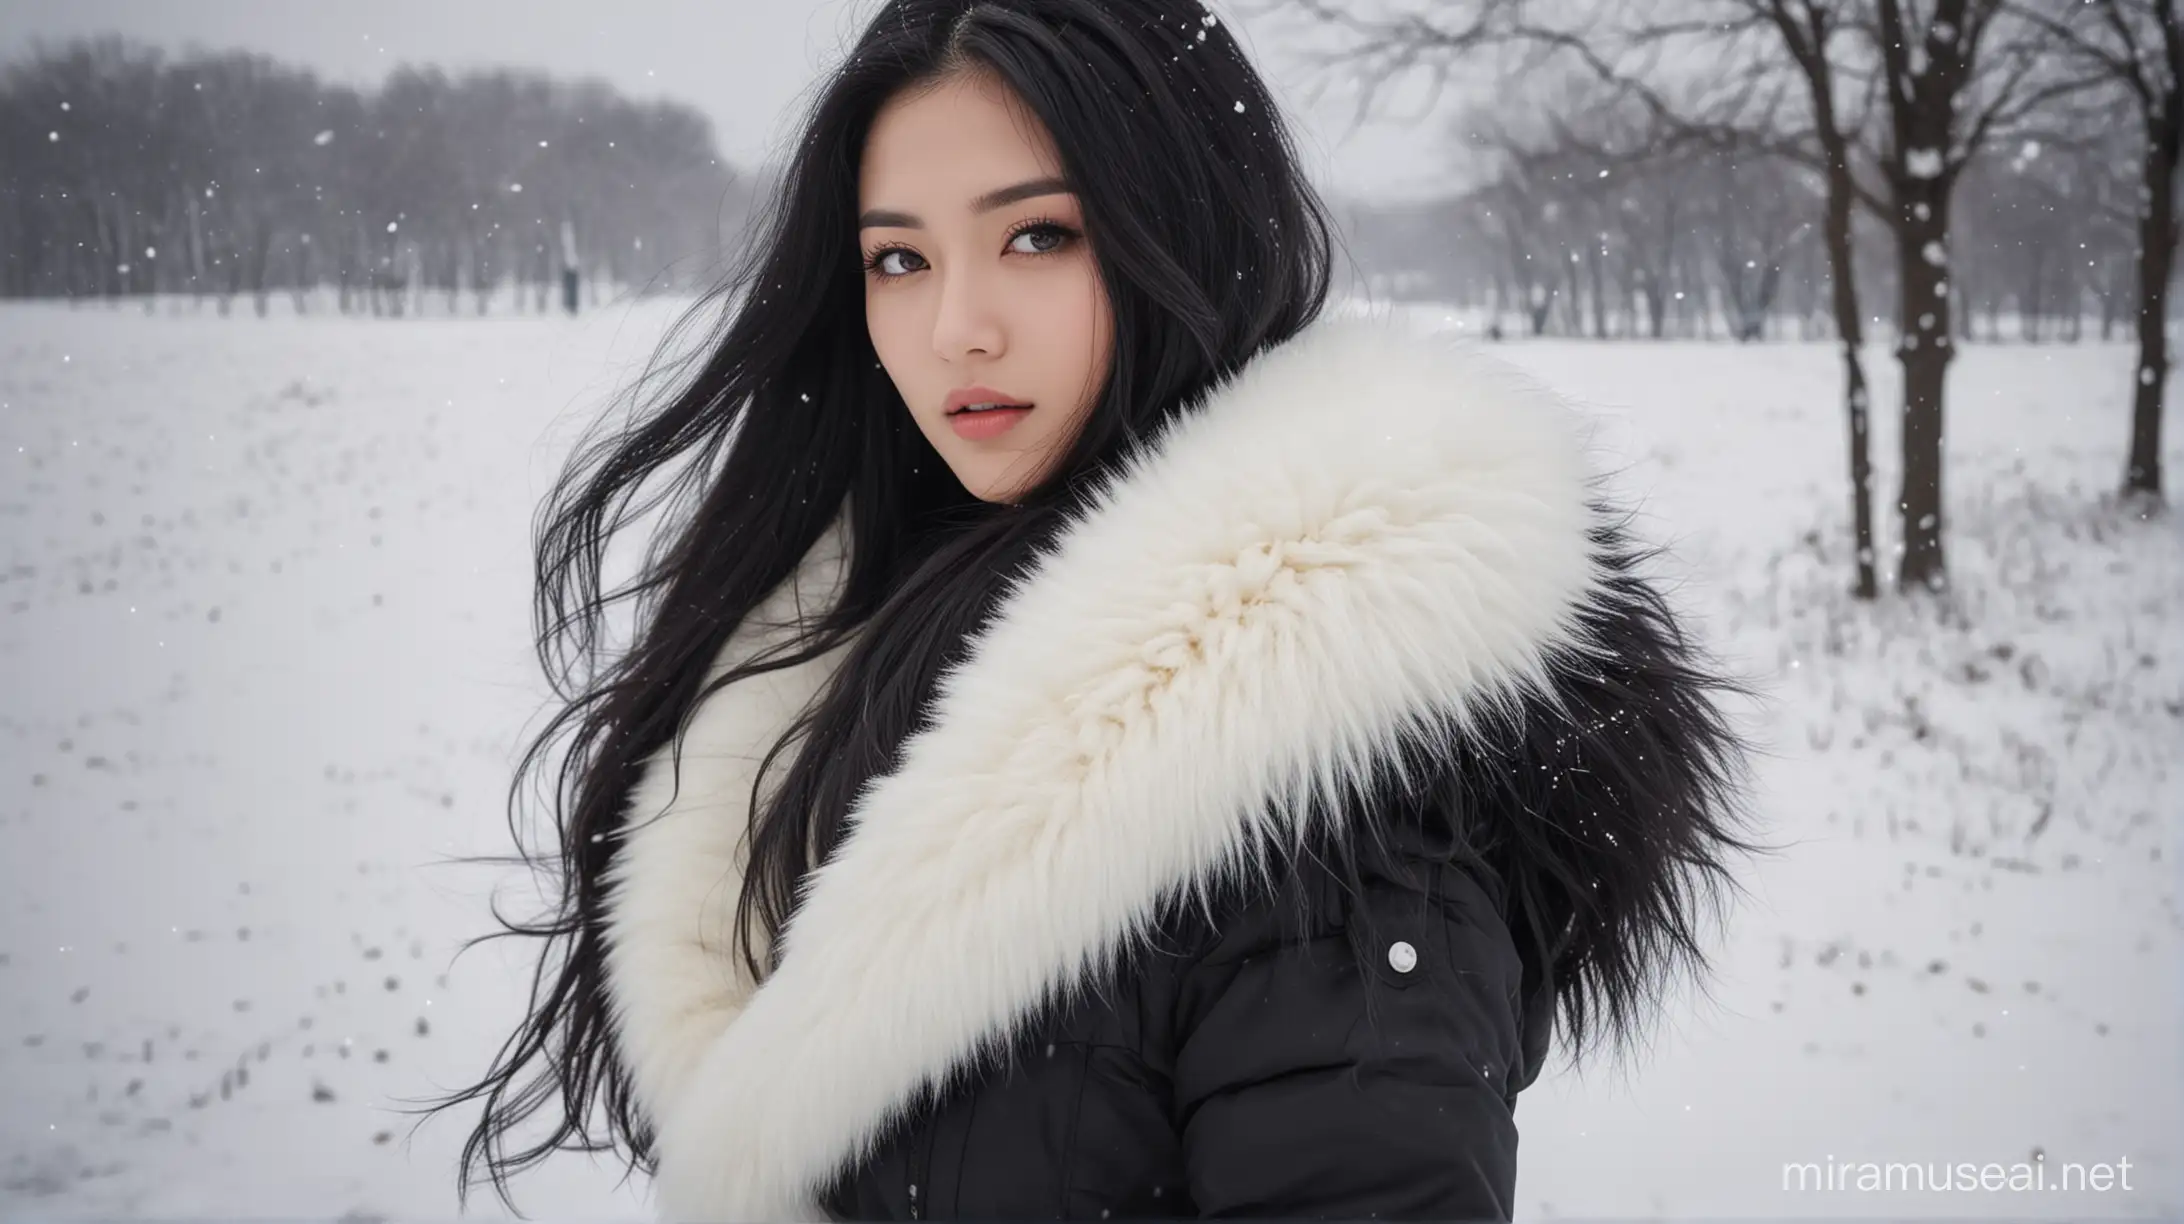 Elegant Woman in Snow Eastern Winter Fashion with Black Down Jacket and White Fur Collar